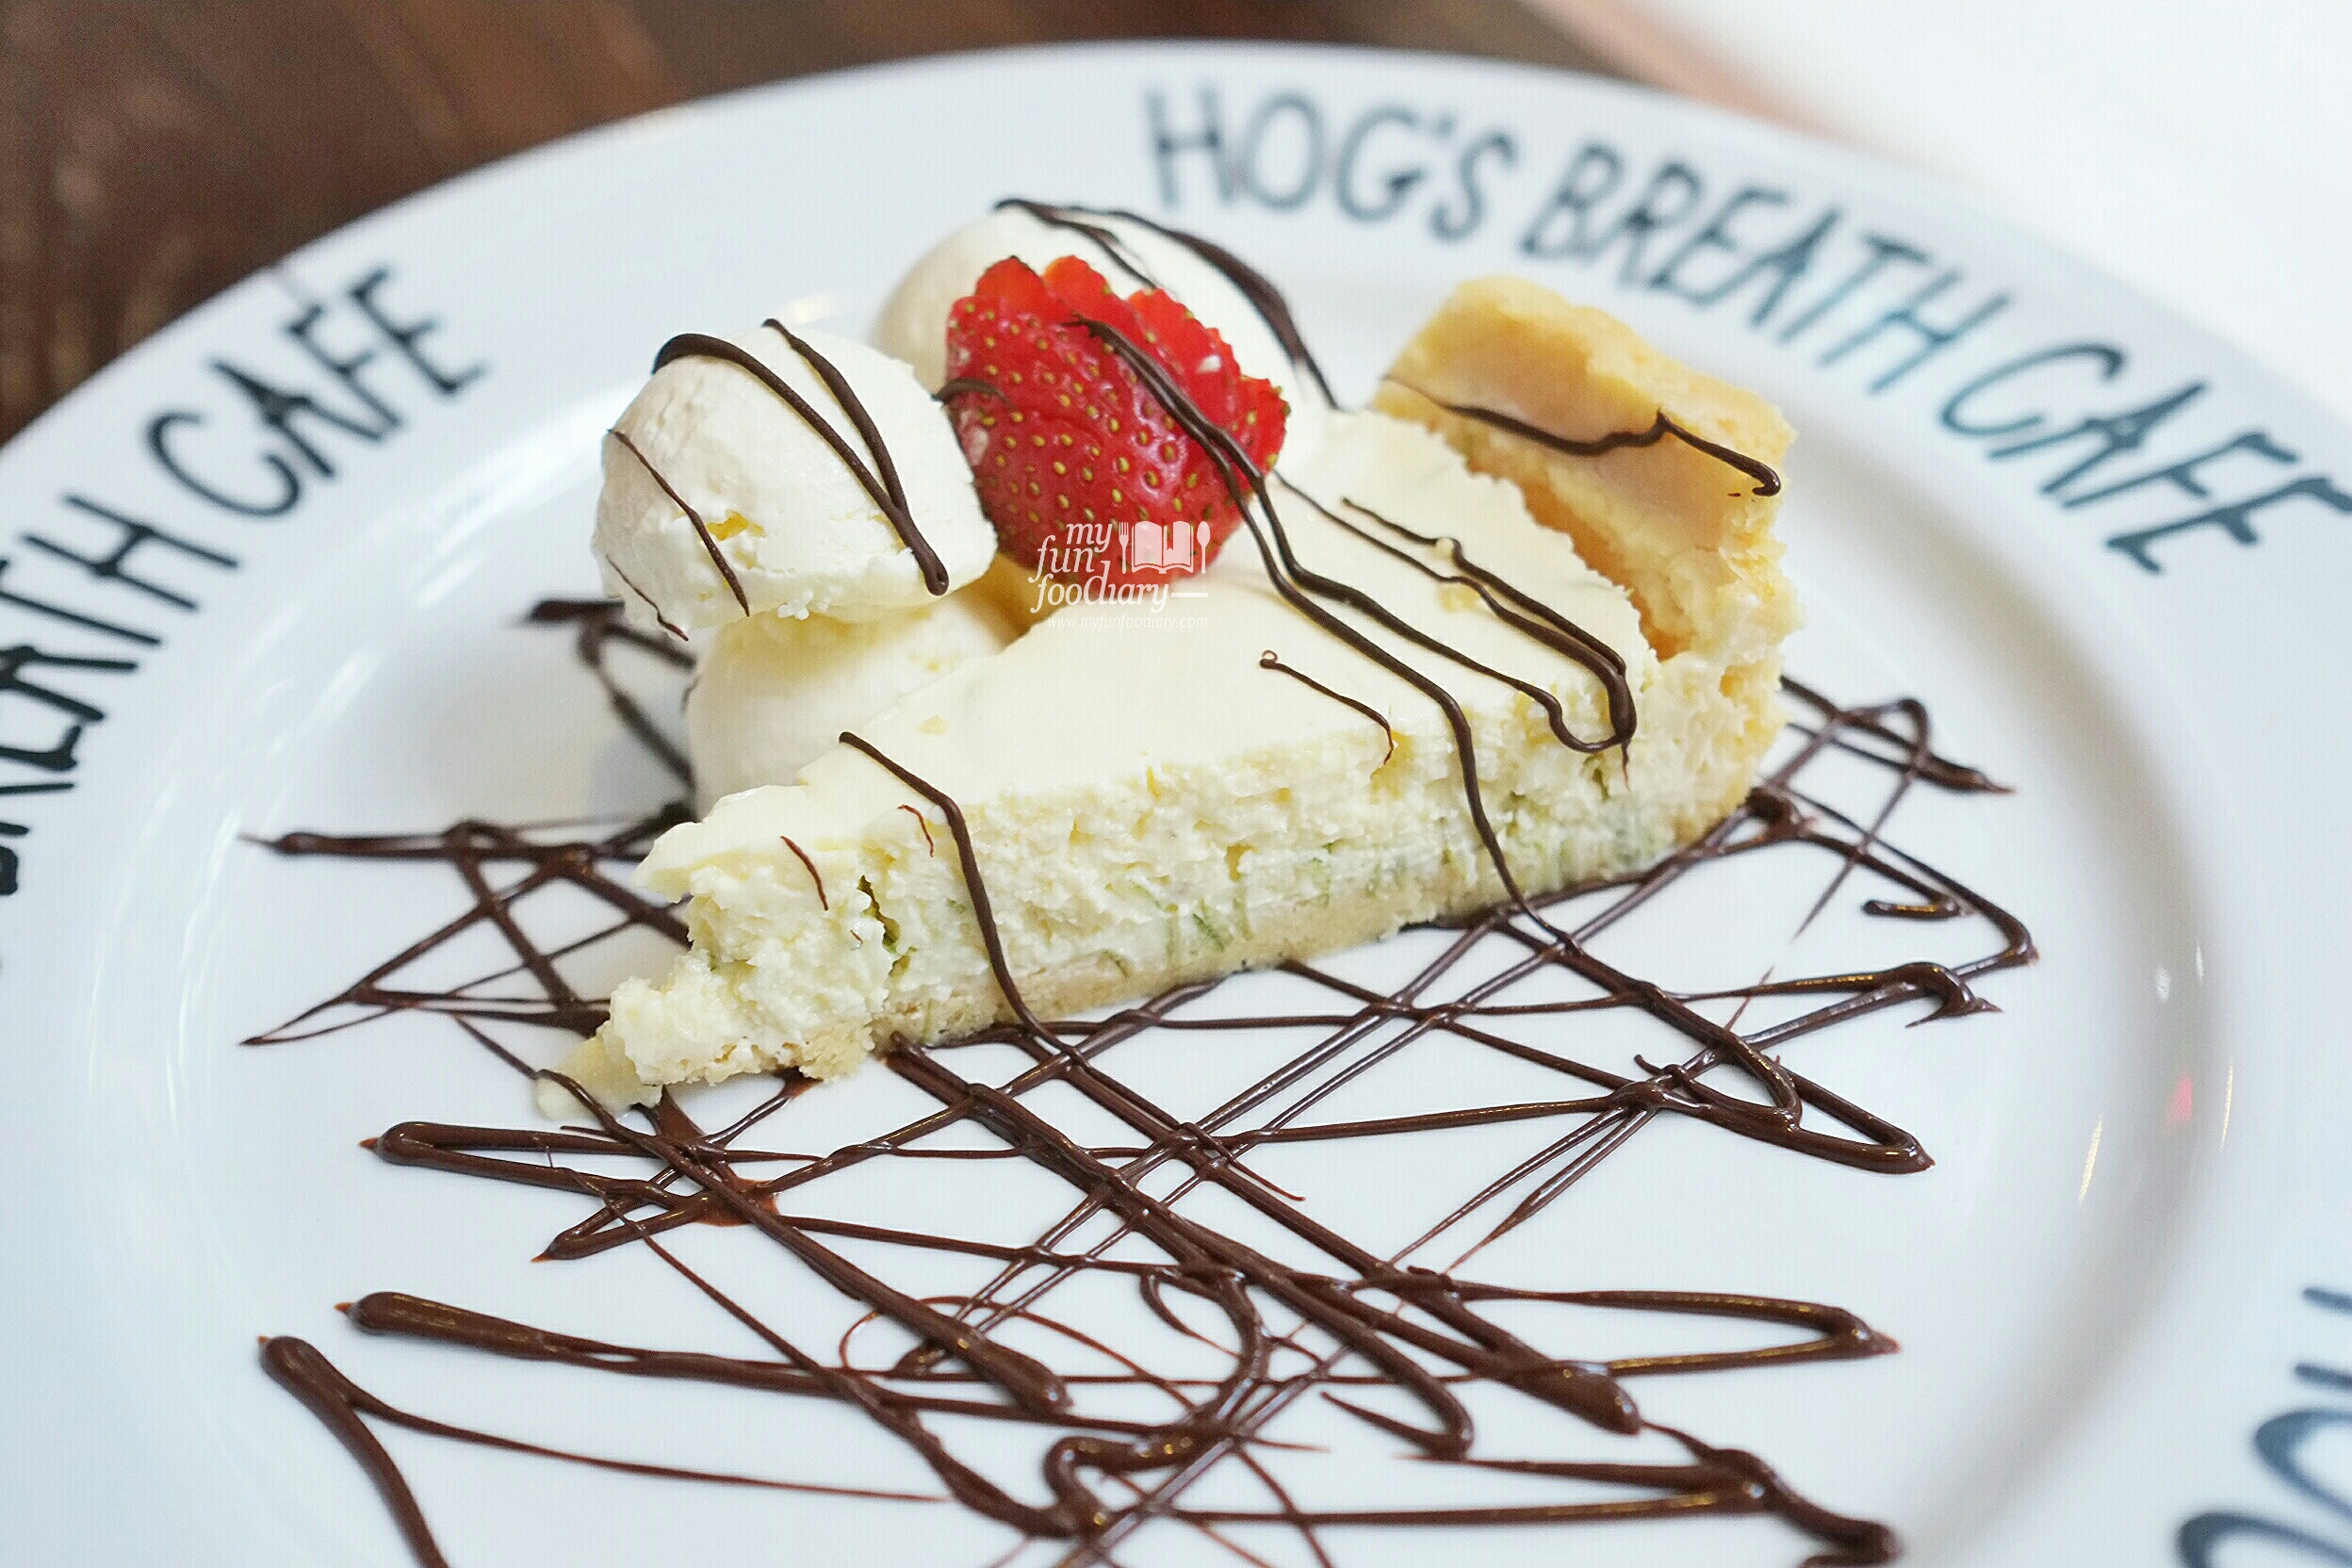 Key Lime Cheese Cake at Hogs Breath Cafe by Myfunfoodiary